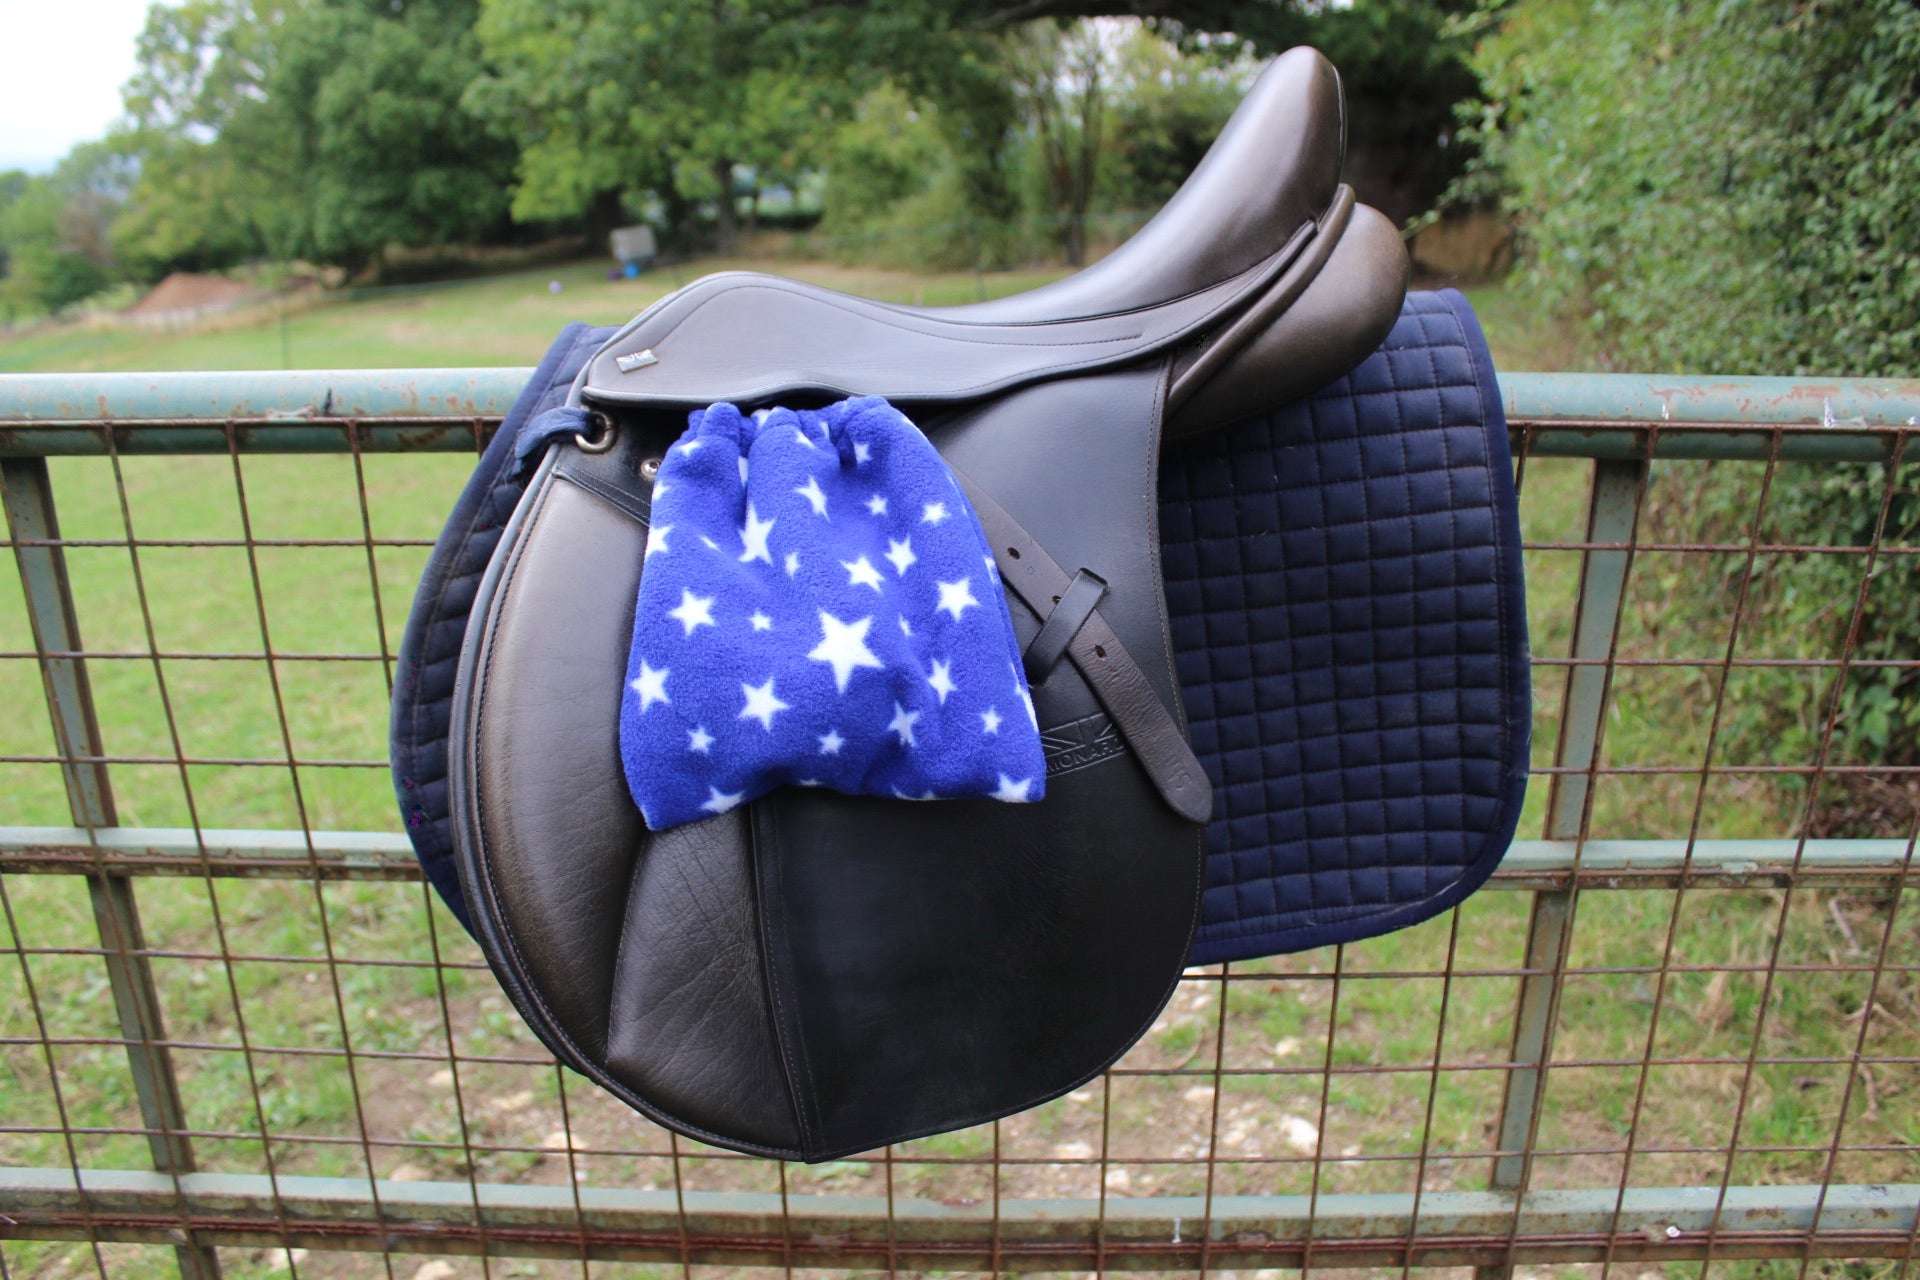 blue stirrup covers with white stars on them, on a brown monarch saddle which has a navy le Mieux saddle pad under, on a field fence